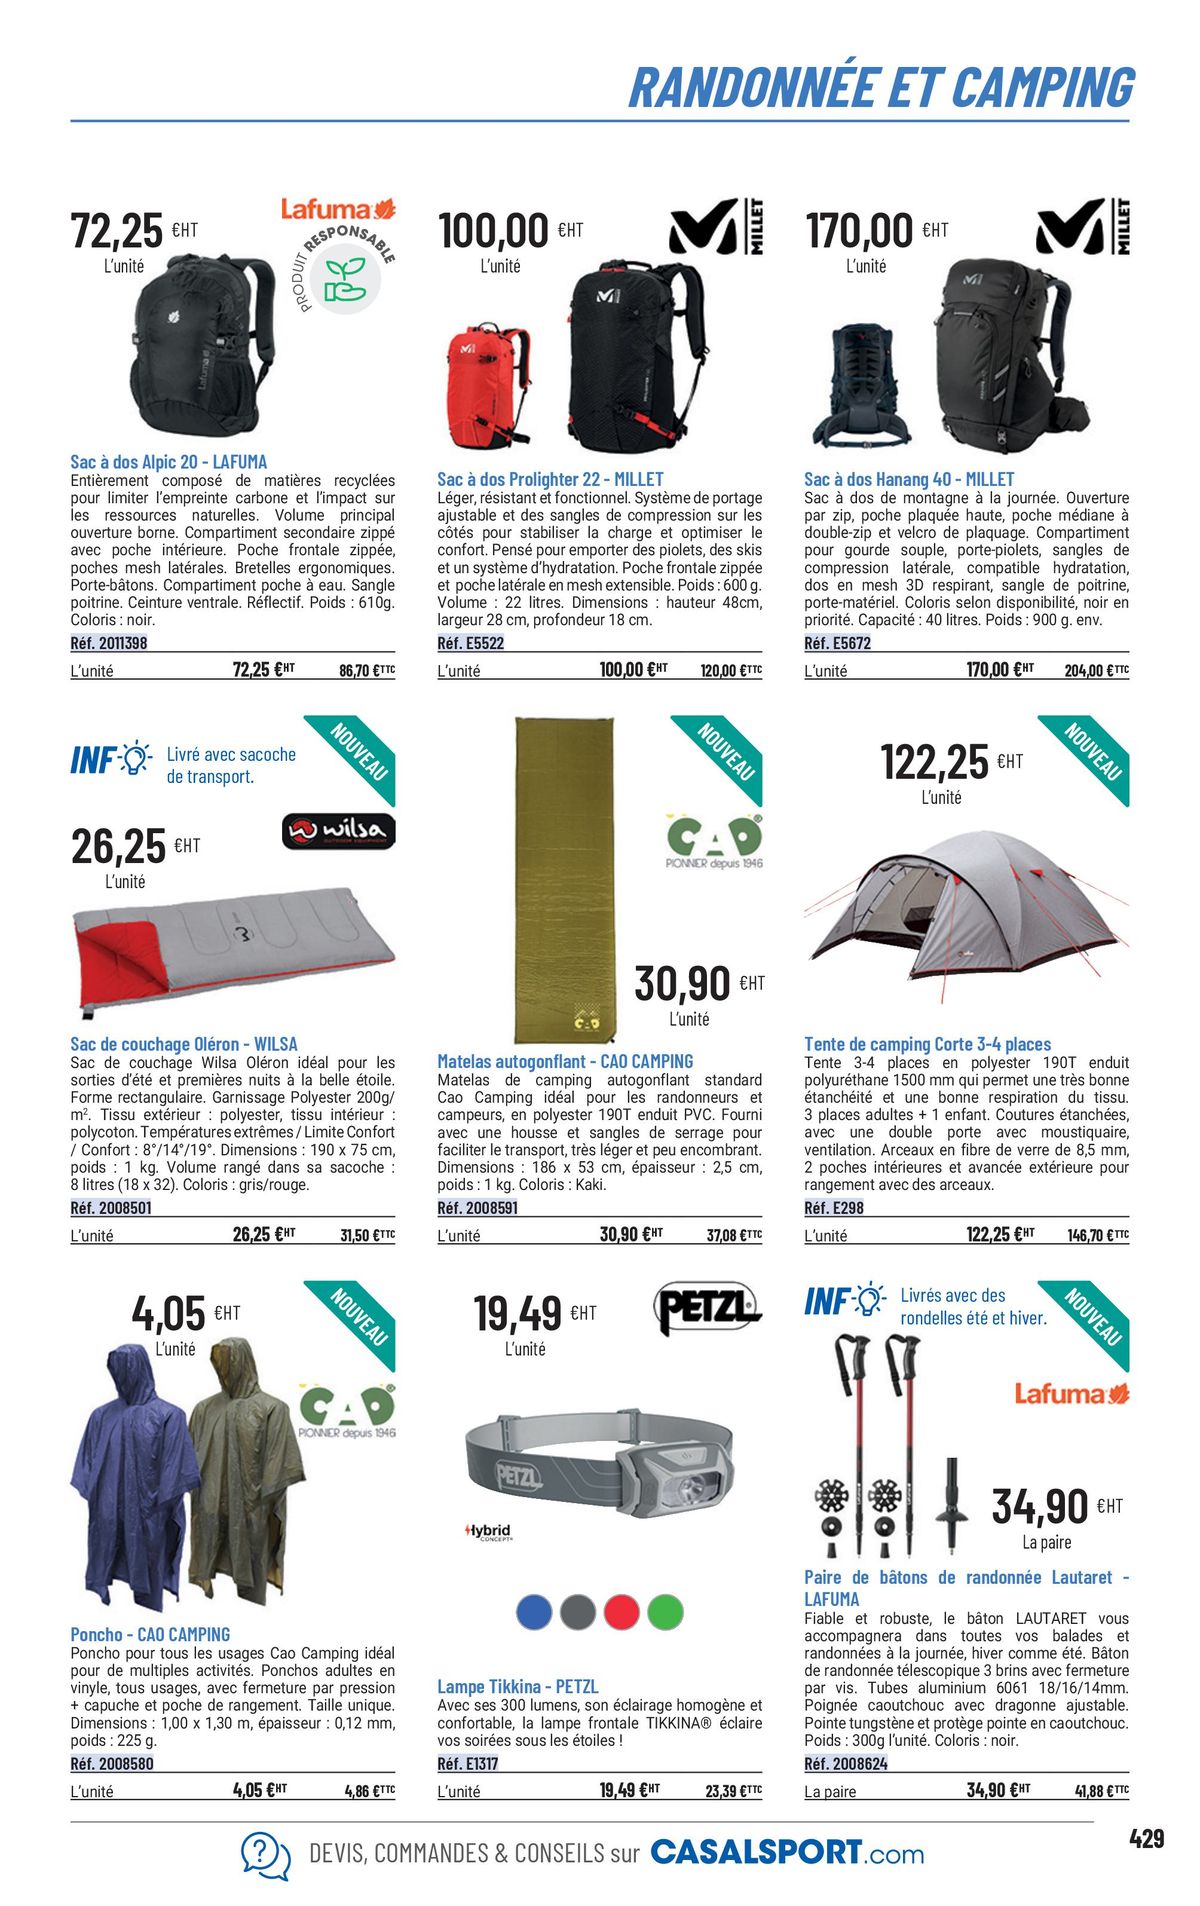 Catalogue Equipement sportif, page 00401